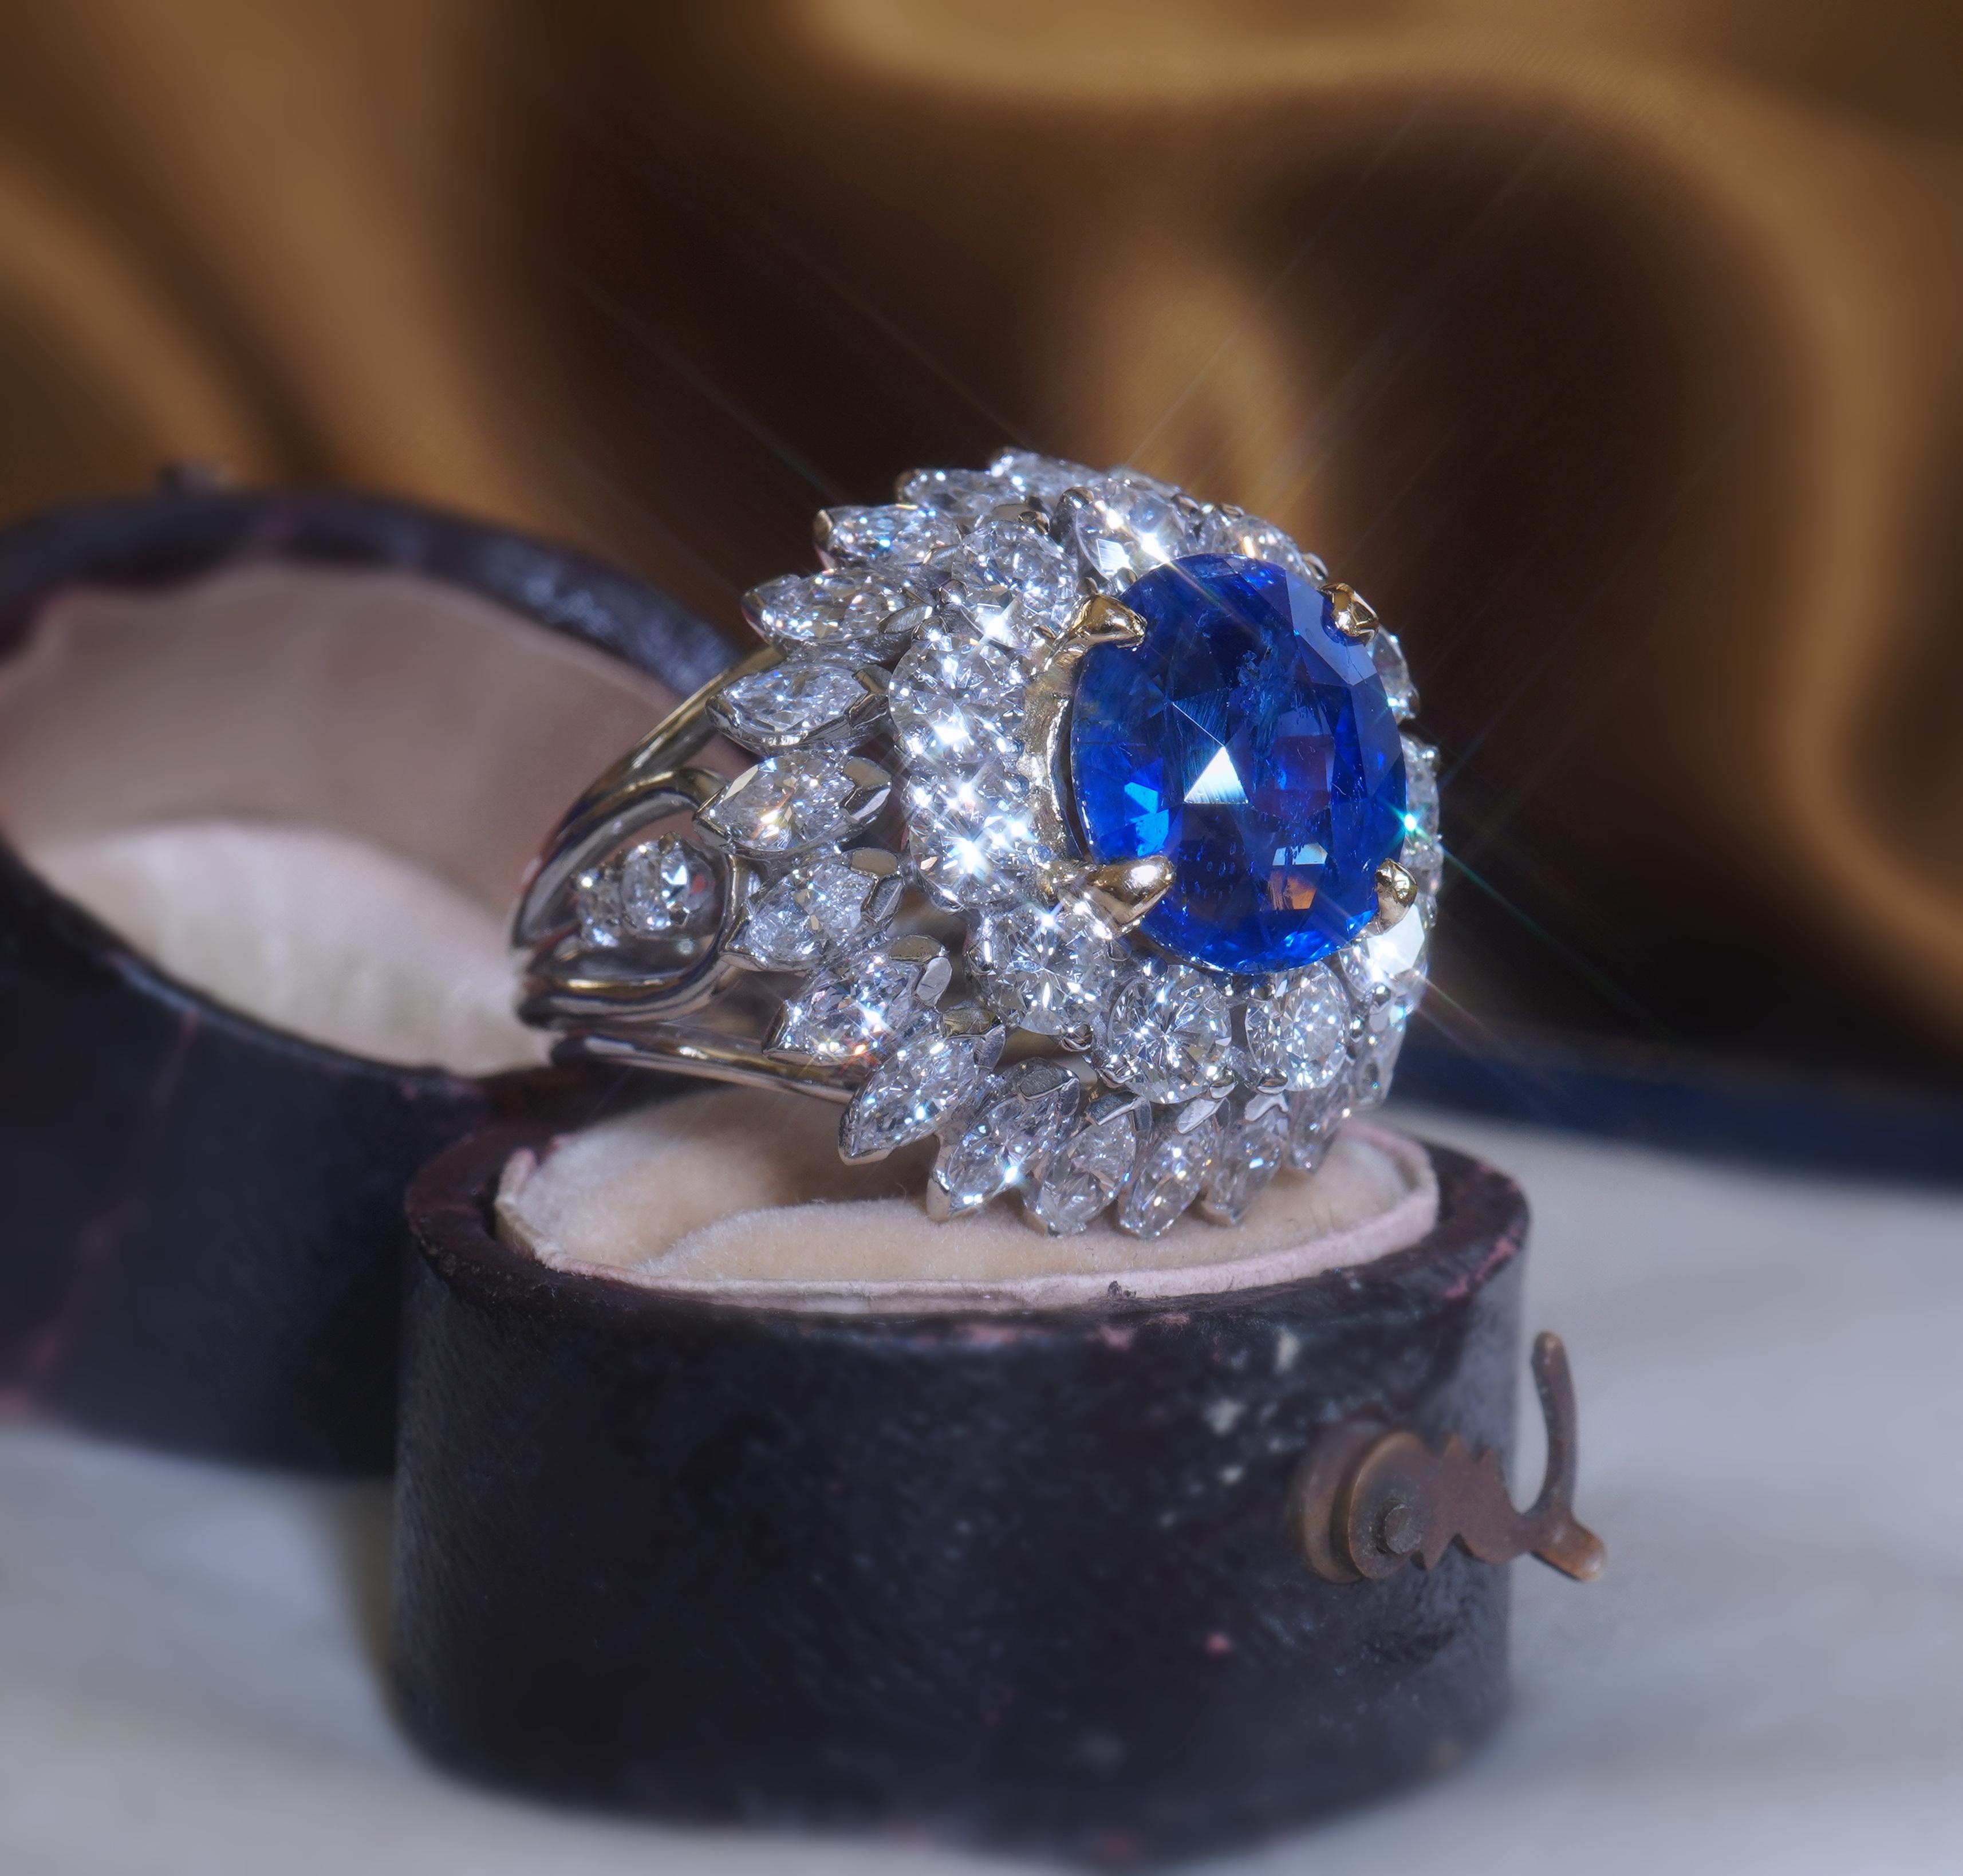 Old South Jewels proudly presents...VINTAGE LUXURY... GIA CERTIFIED PLATINUM & 18K 11.27 CARAT UNHEATED SAPPHIRE & DIAMOND VINTAGE RING AND BOX.   5.85 CARAT TRANSPARENT BLUE GIA CERTIFIED RARE NO HEAT NATURAL CEYLON SAPPHIRE.   (This Gorgeous